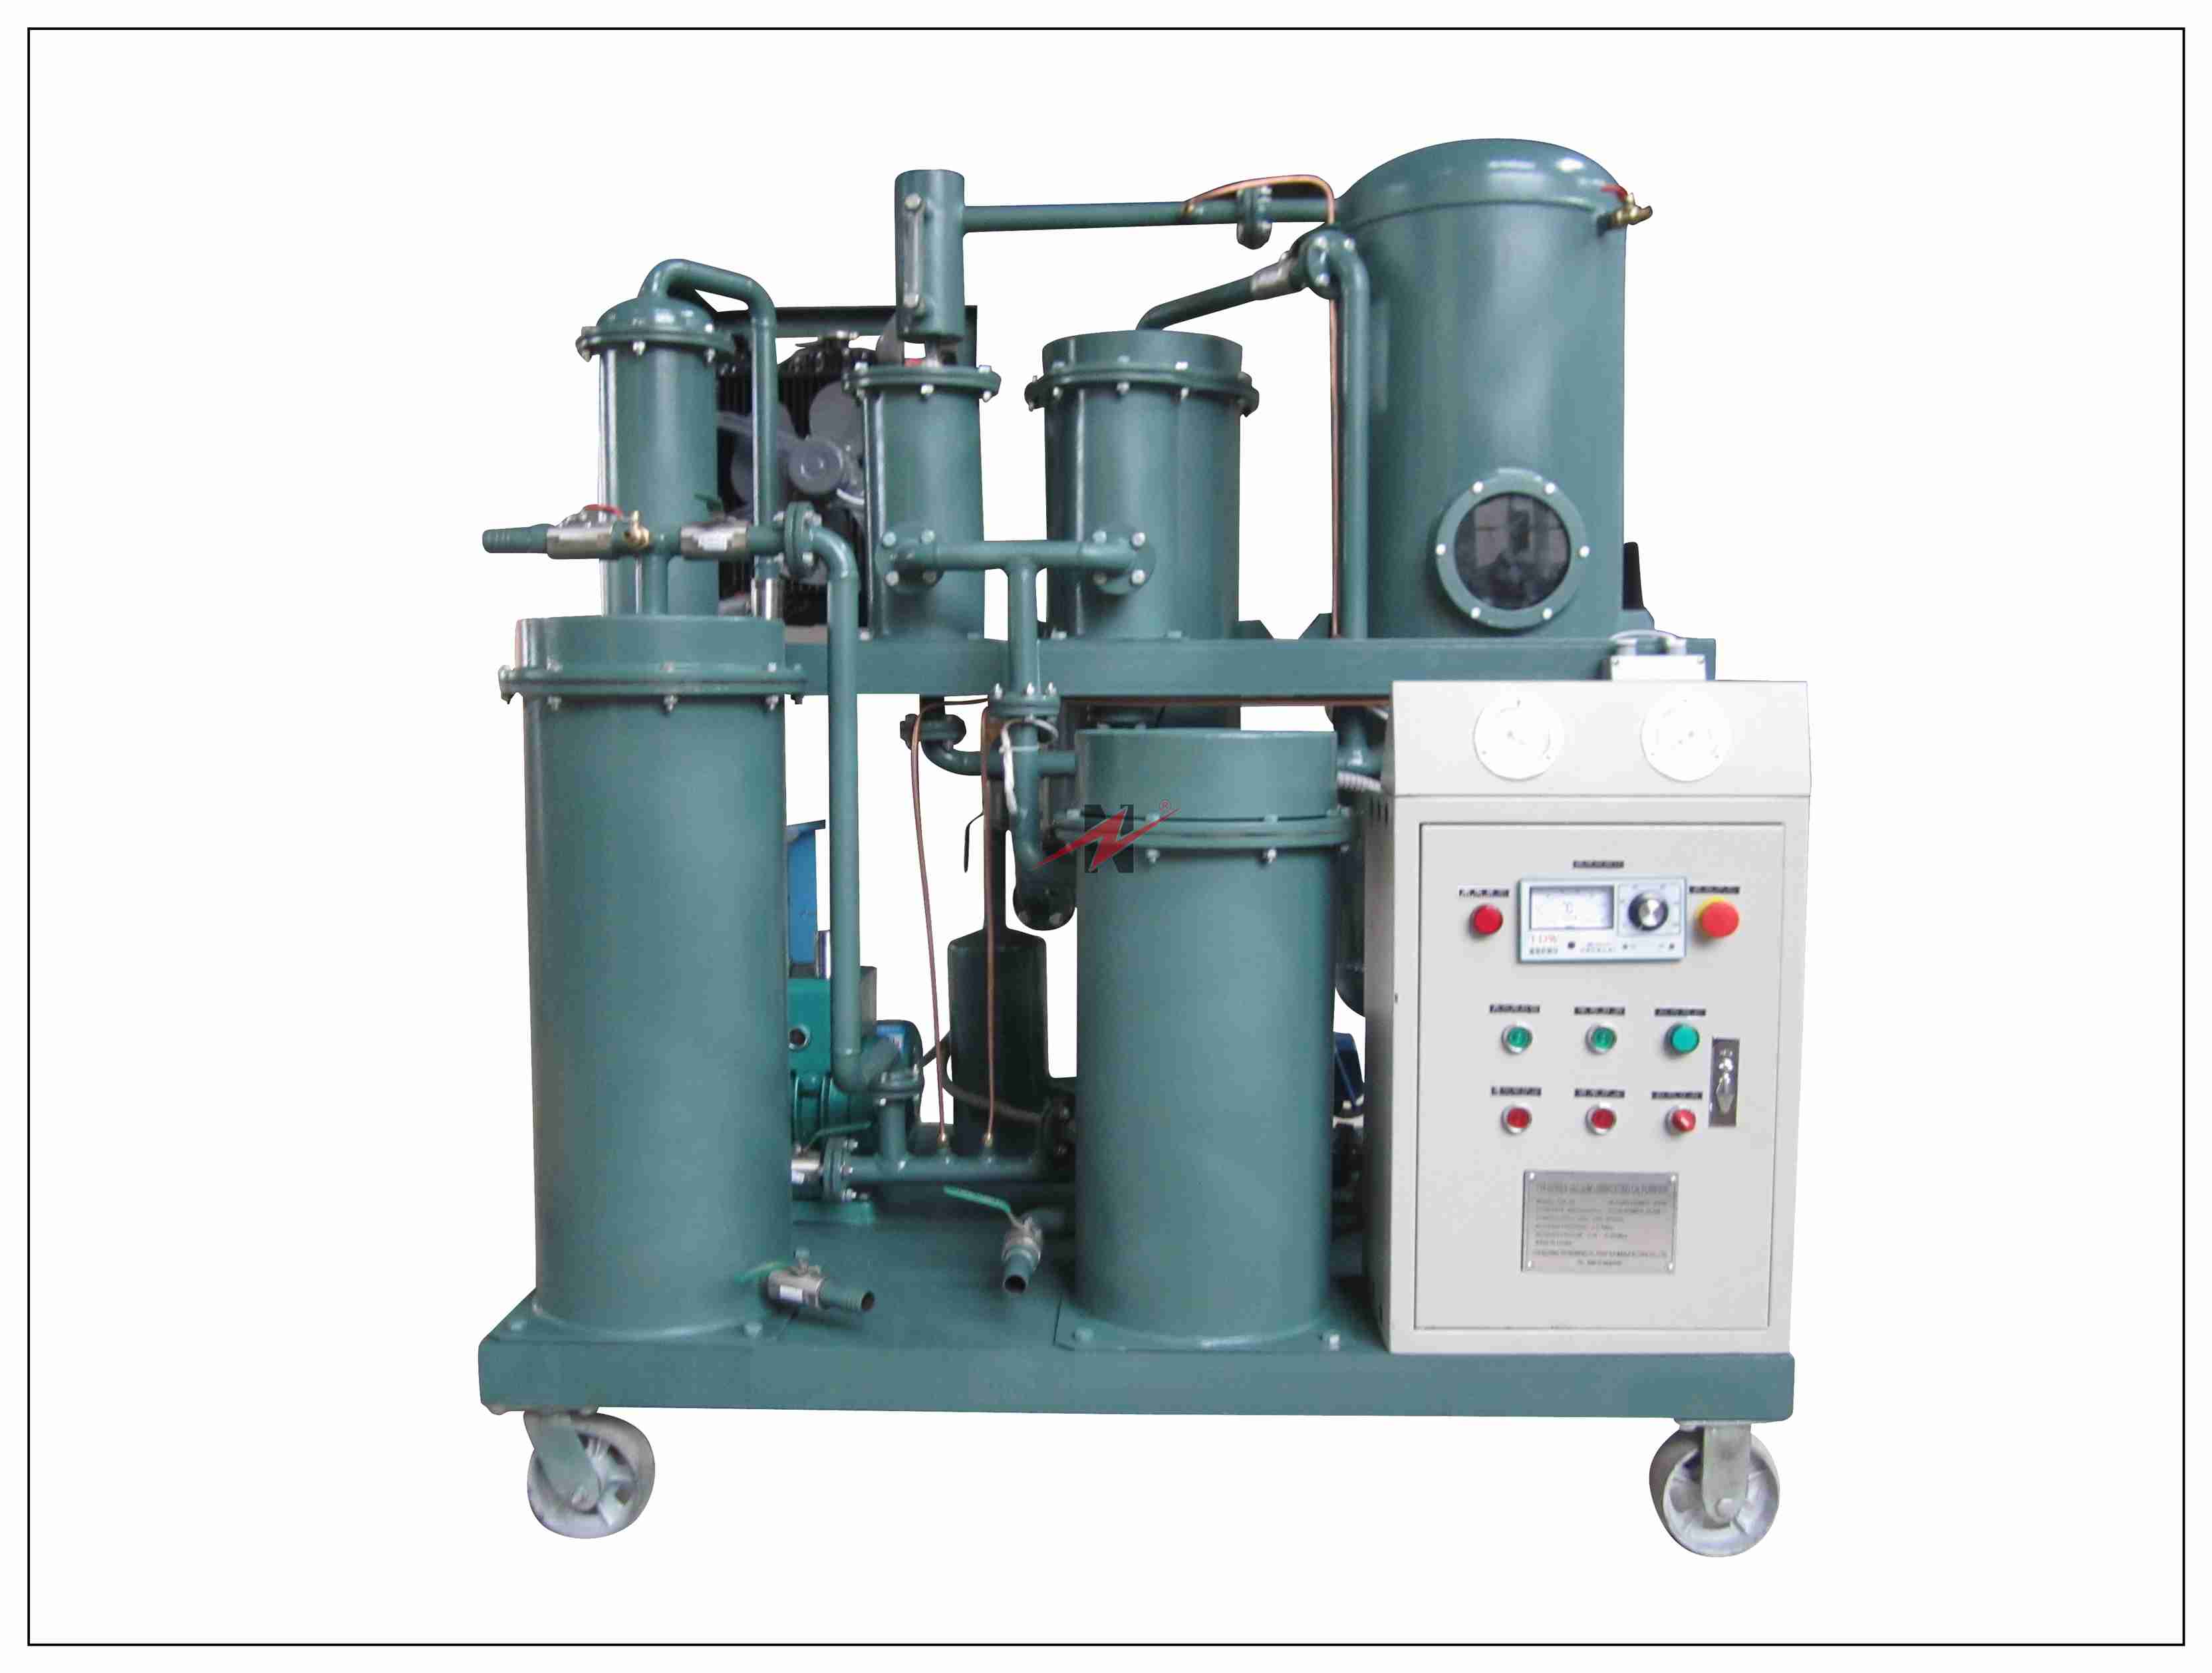 TYA-W Enclosed Weather Proof Vacuum Lube Oil Purifier 